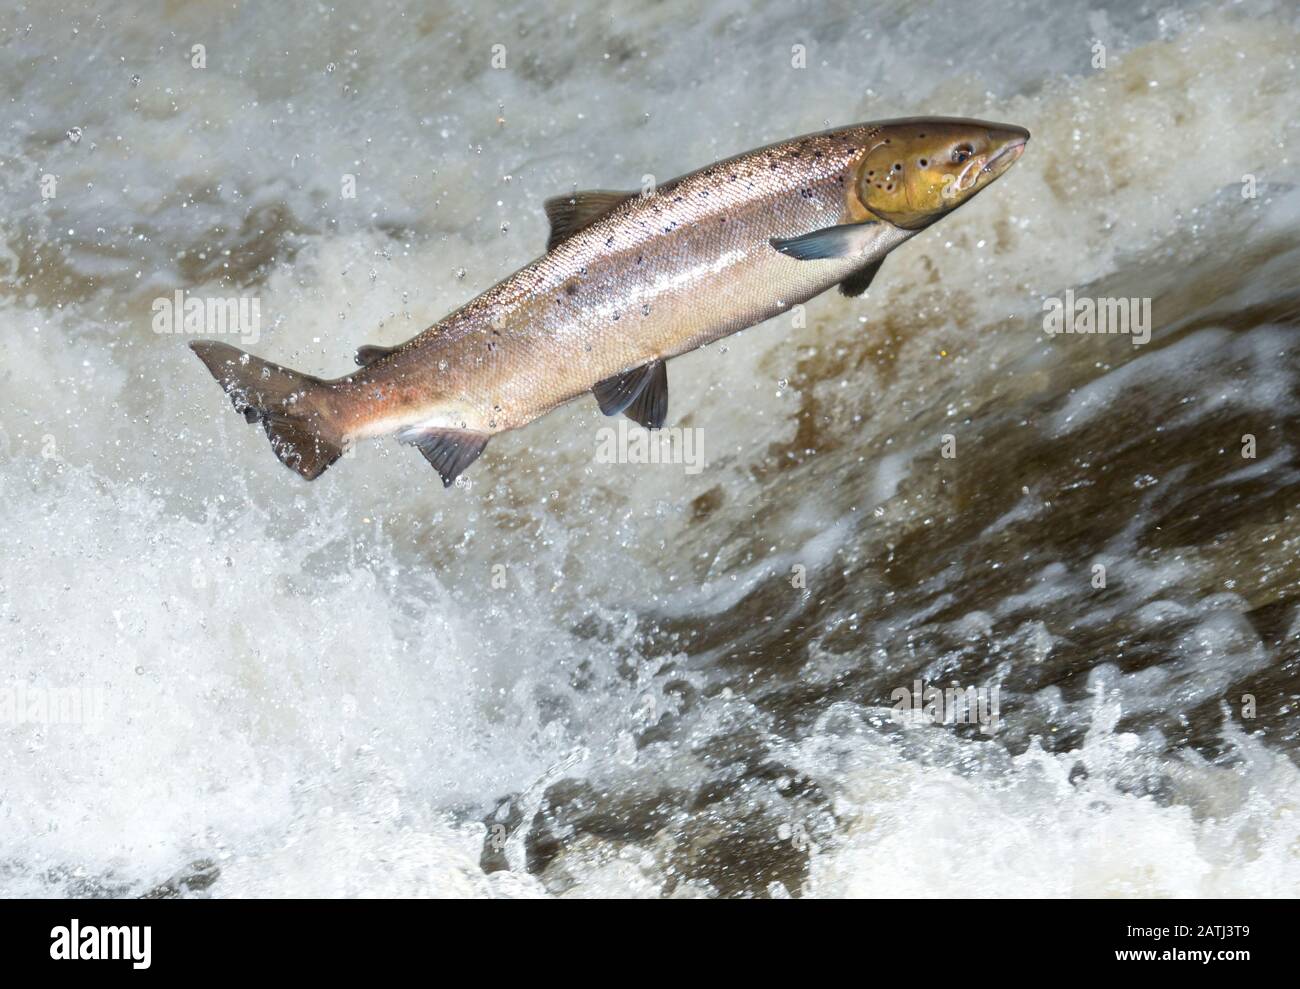 This female Atlantic Salmon, Salmo salar was trying to leap over a waterfall in a Scottish river. Dynamic and dramatic. Stock Photo